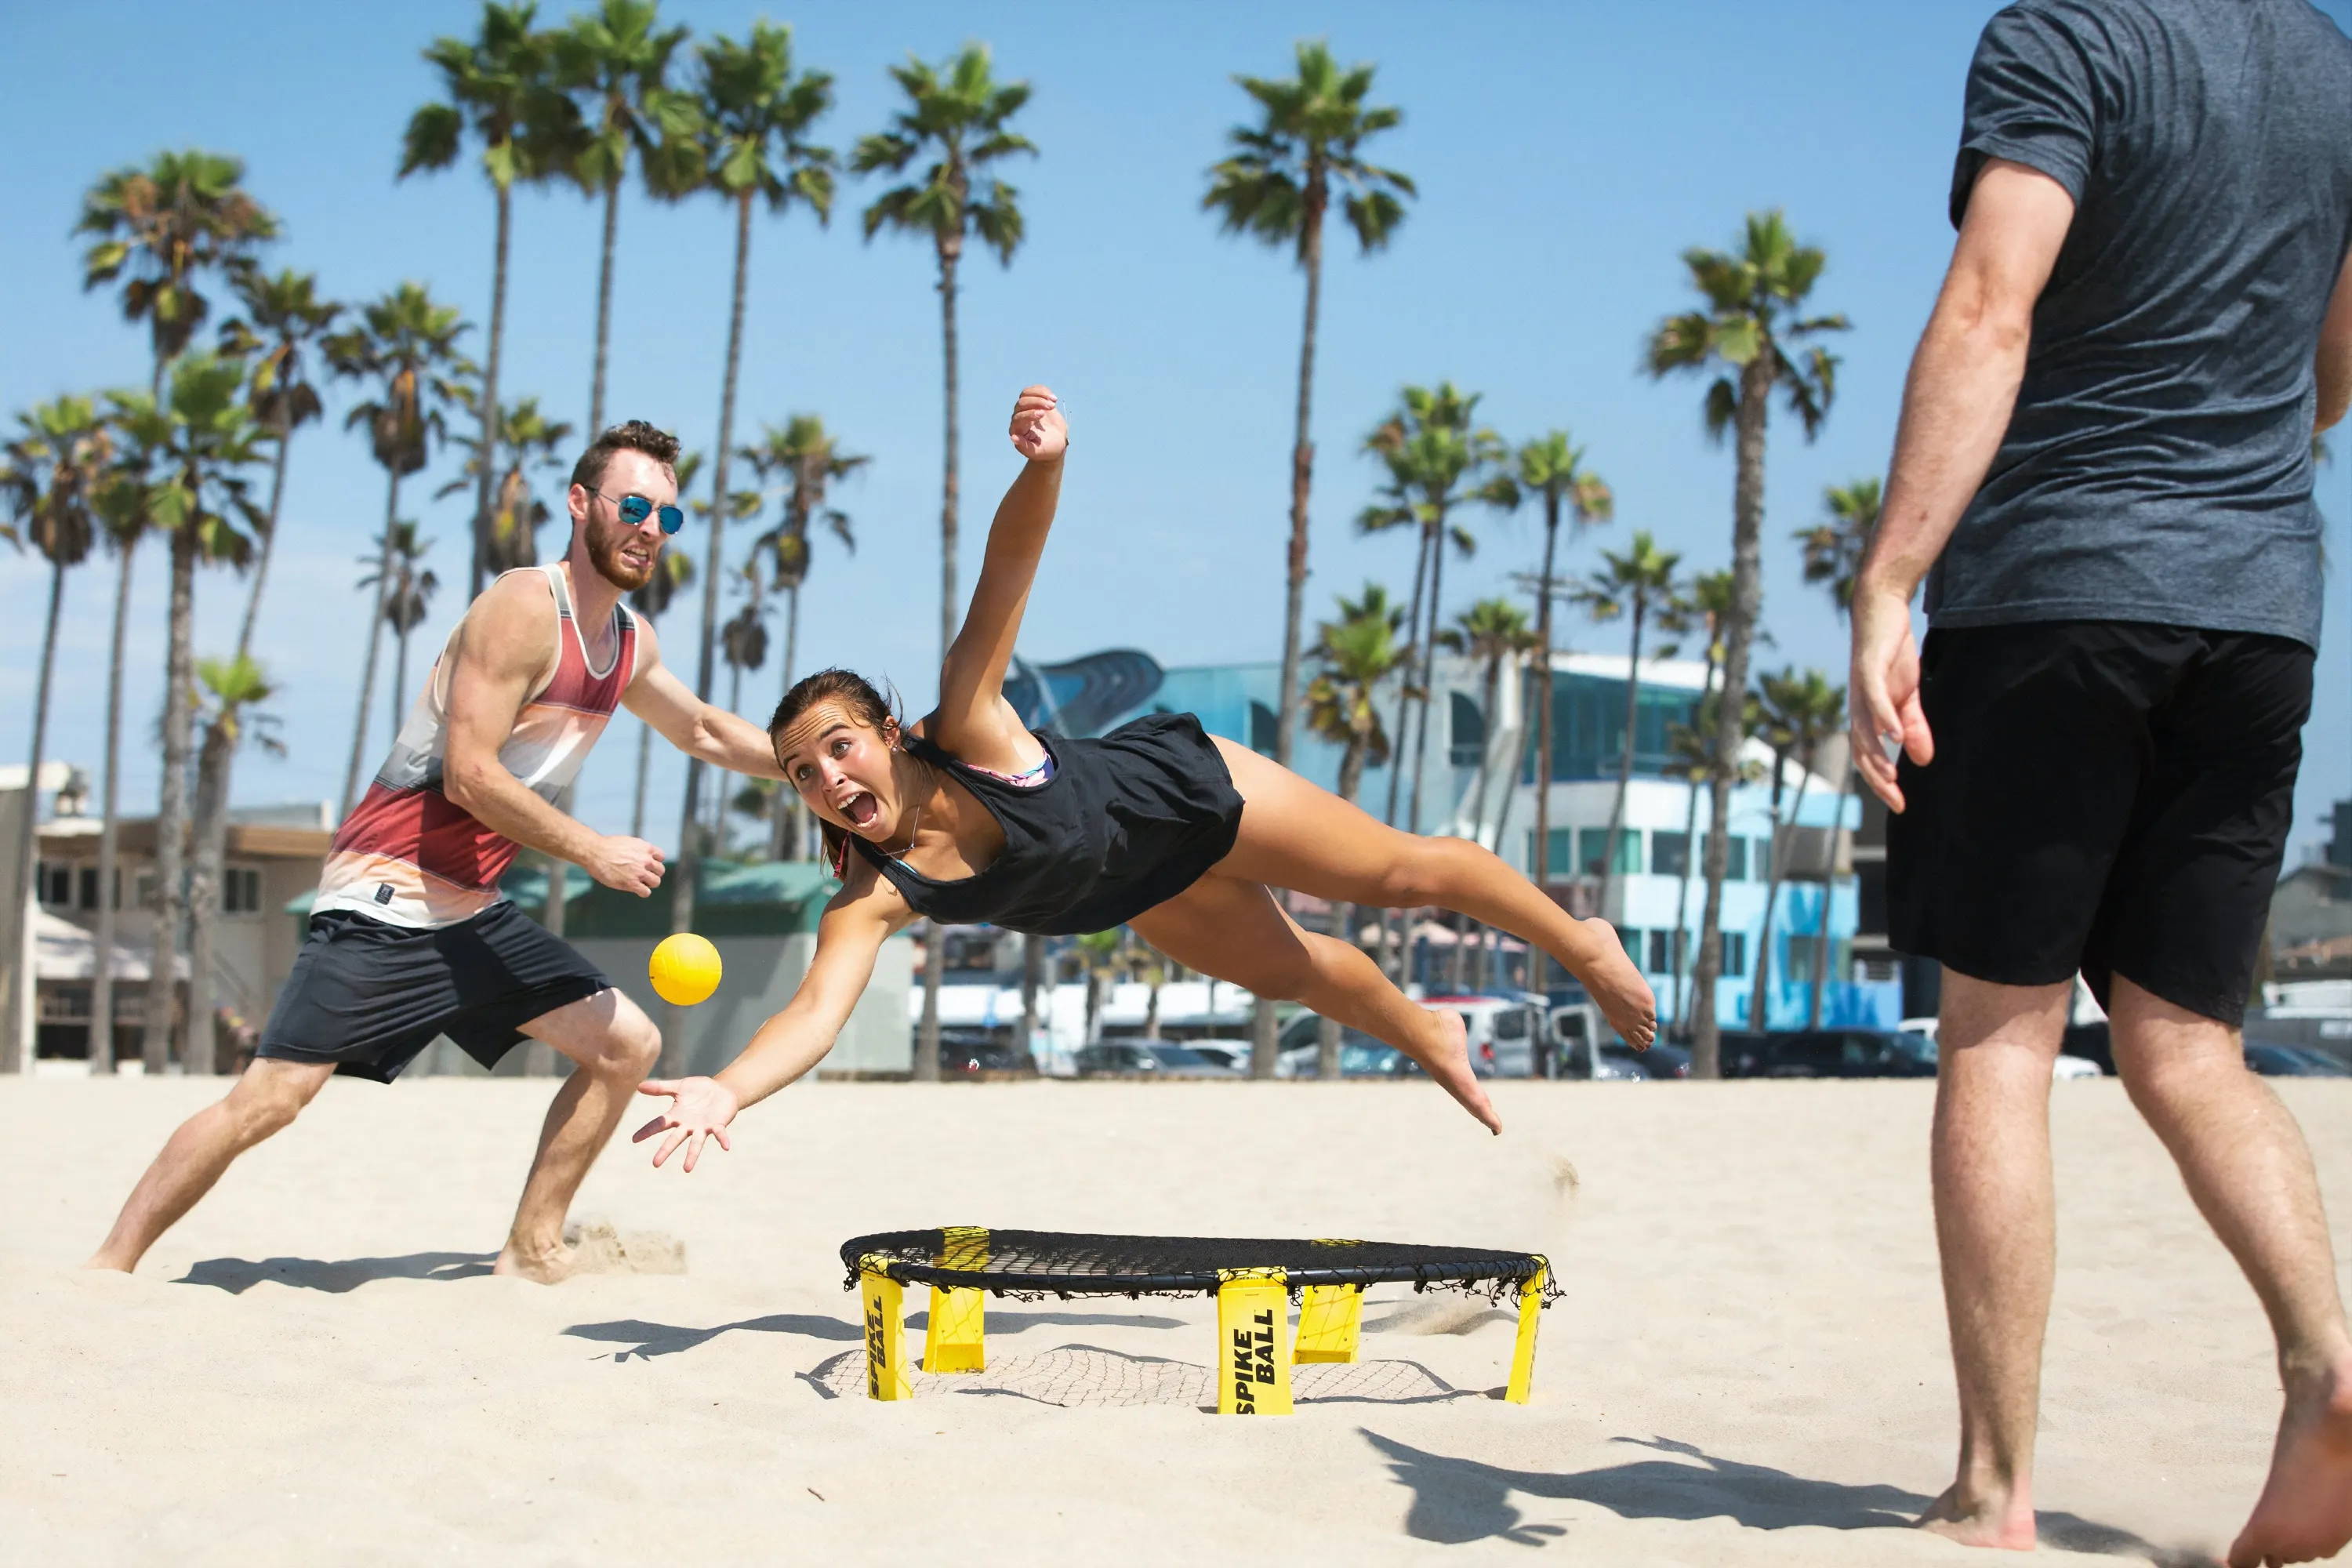 Spikeball player diving for the ball